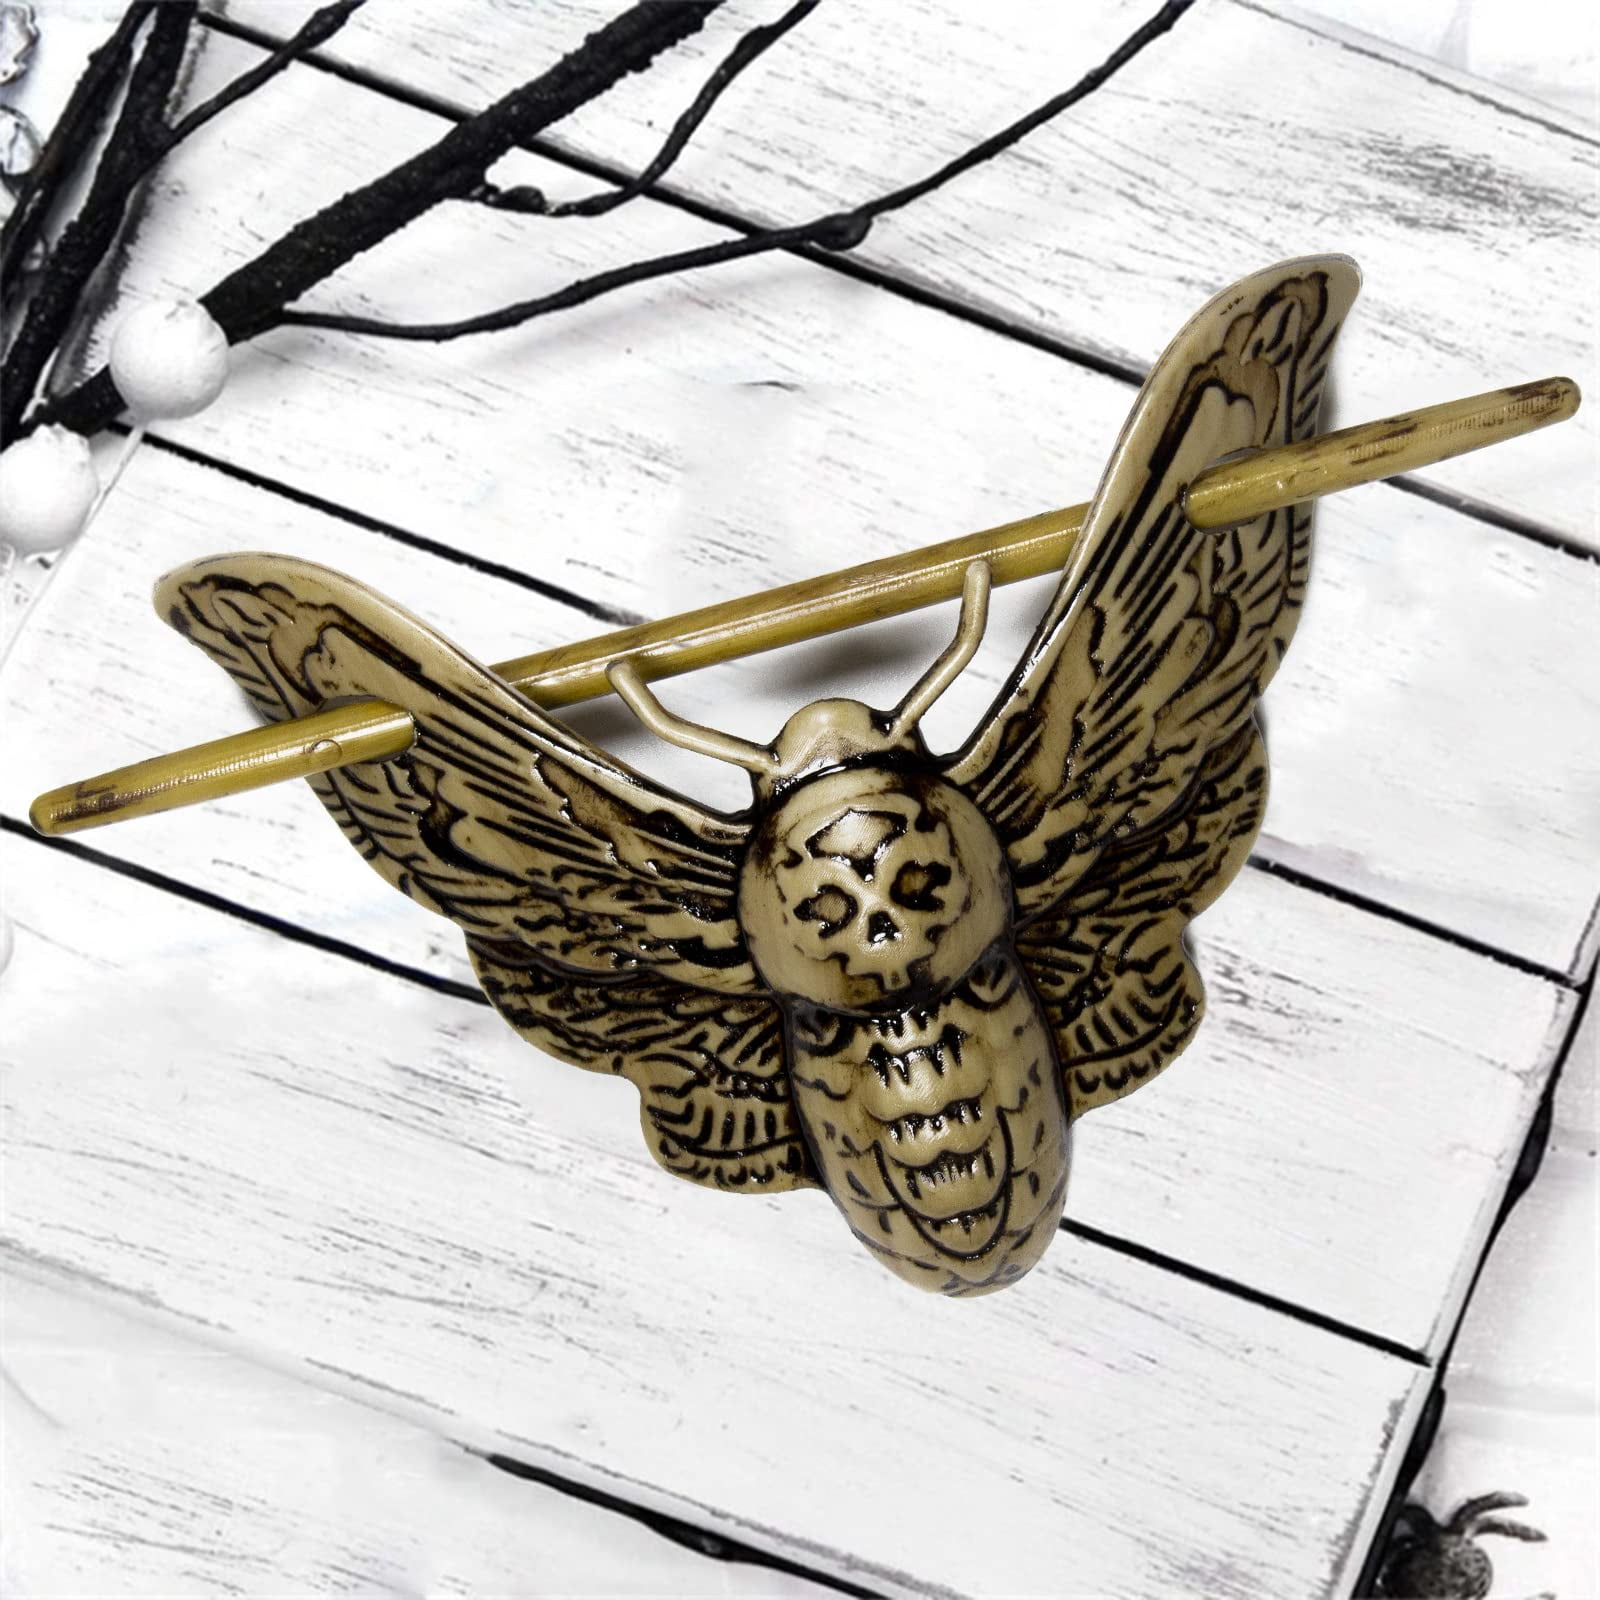 Old Vintage Viking Owl Hair Charms Accessories For Women 2023 Metal Goth  Haar Clip Stick Chopsticks Hairpin Dreads Jewelry